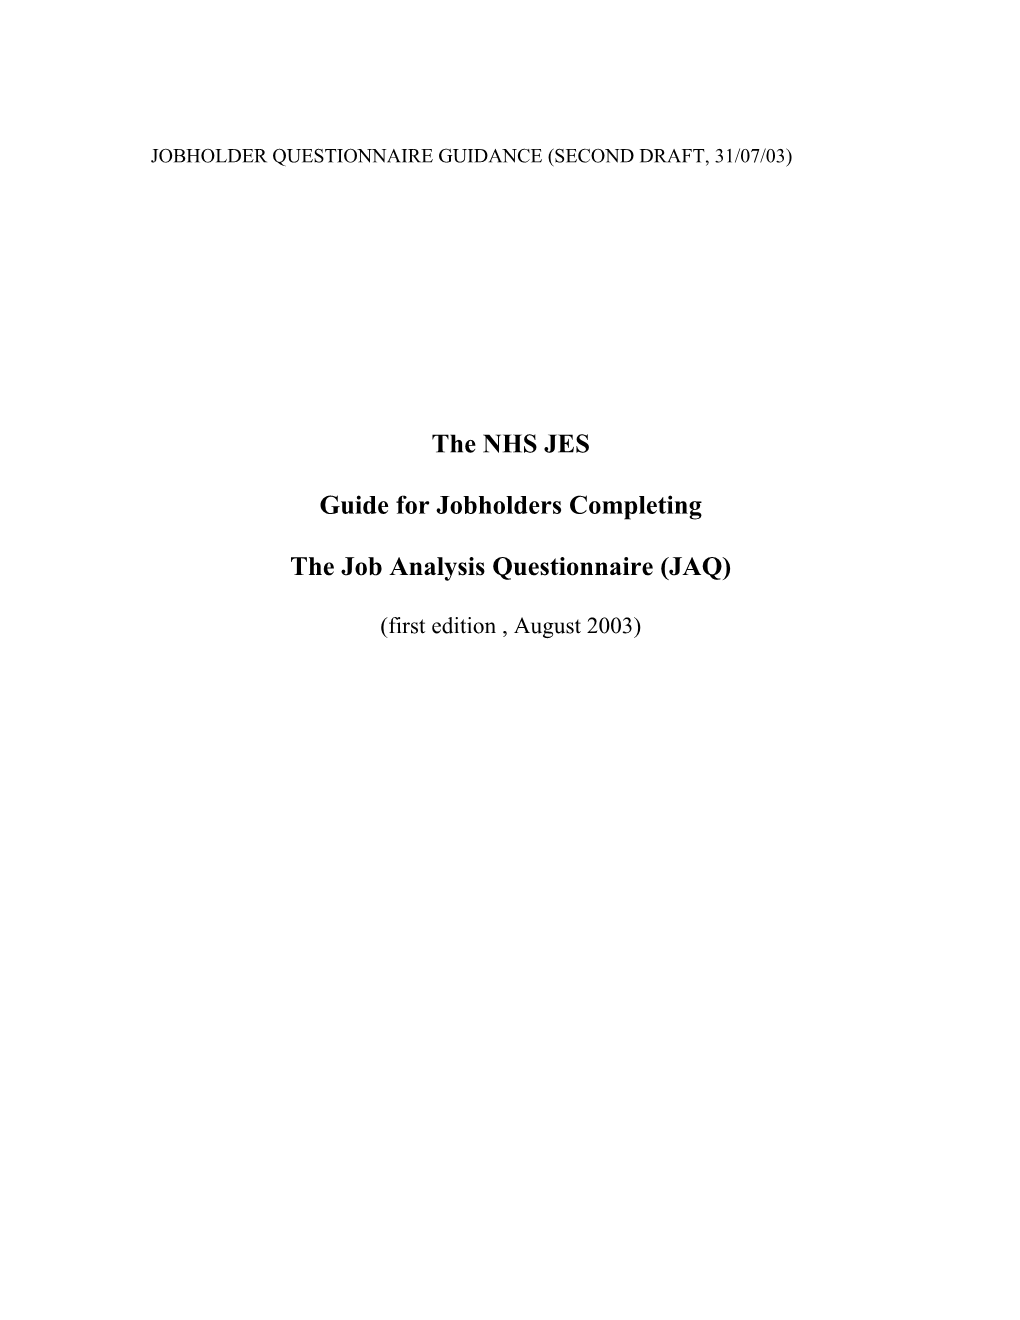 37 Download AFC Jobholder Guide for Completing Job Analysis Questionnaire Aug 03